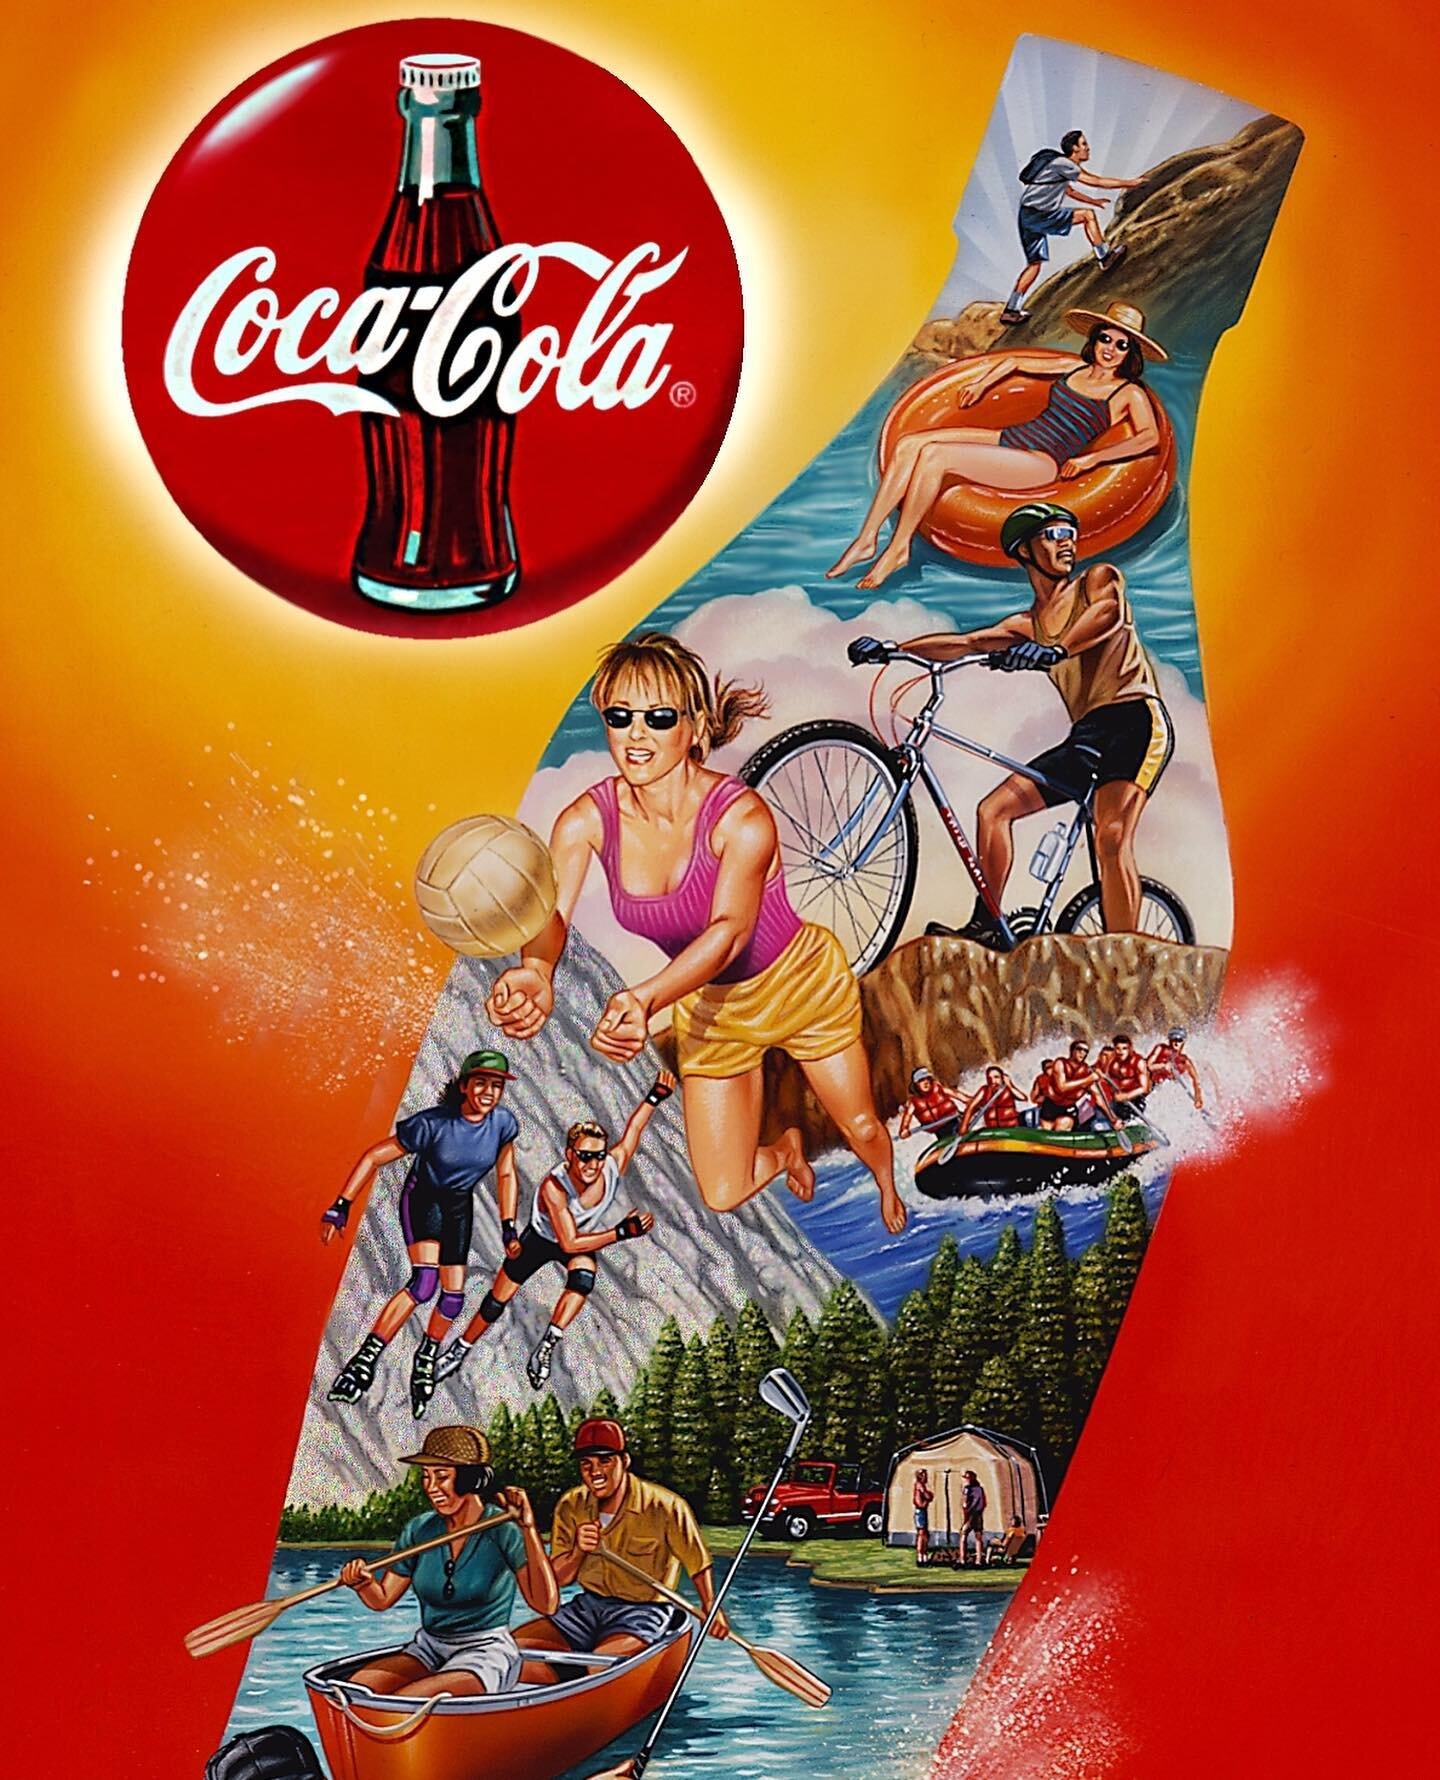 The montage back again with an early 90s summer in @cocacola land. ⁠The bladers in the mountains are the best.⁠
⁠
Illustration by Gary Ciccarelli⁠
The Man Who Illustrated Your Childhood⁠
⁠
follow @yourillustratedchildhood 
⁠
⁠
⁠
⁠
⁠
⁠
⁠
⁠
#coke #summ